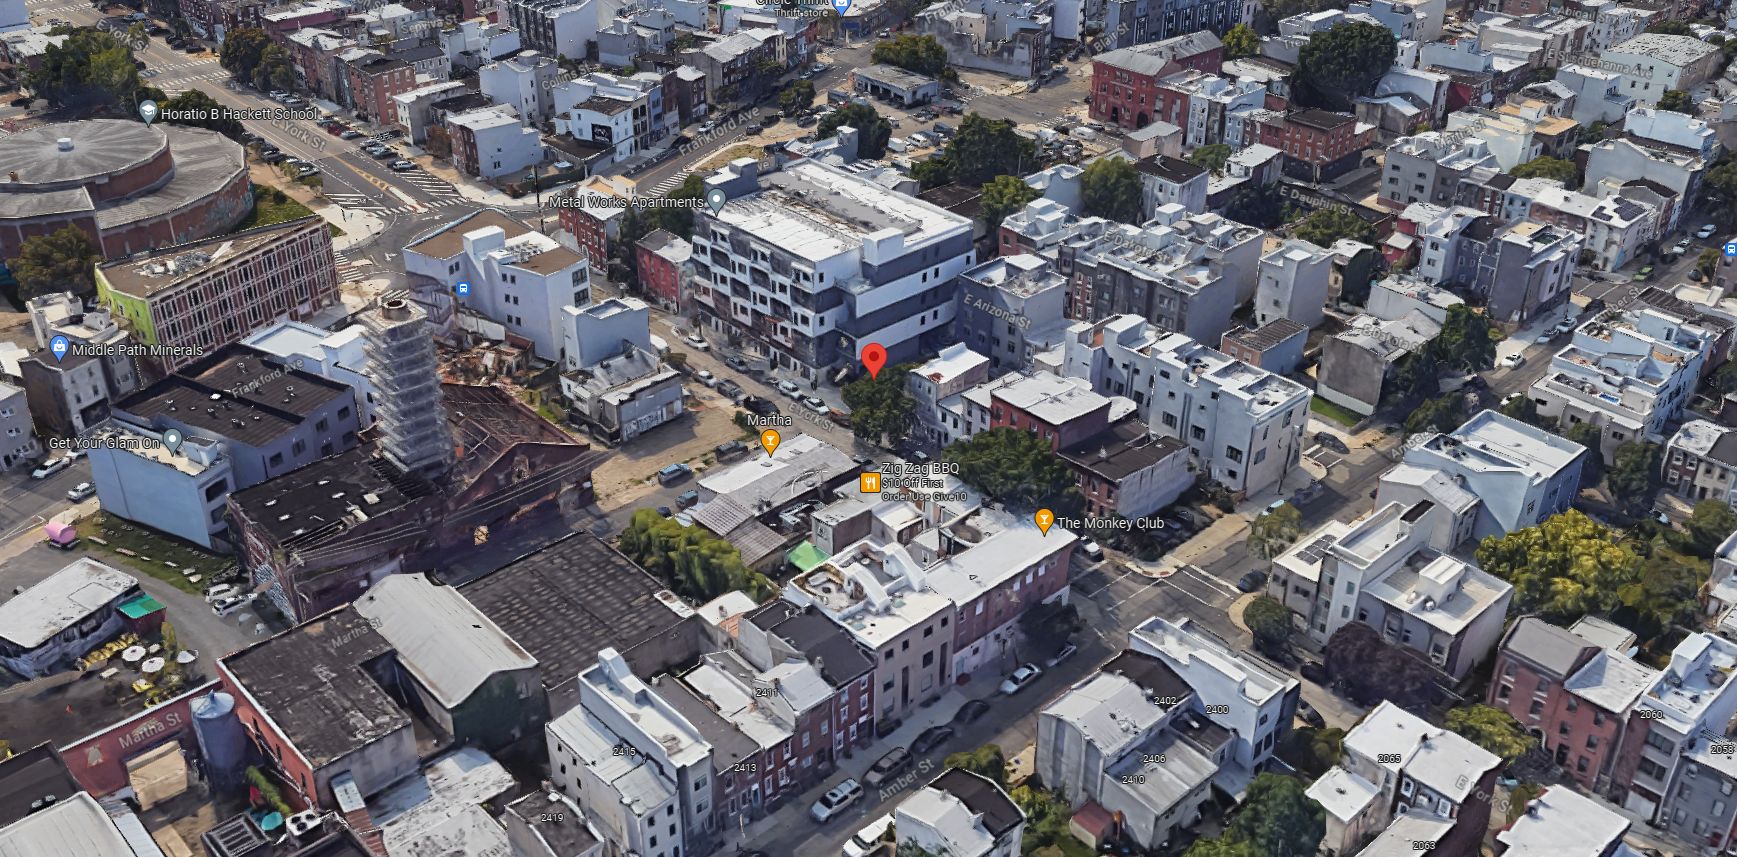 2118 East York Street. Aerial view prior to redevelopment. Looking south. Credit: Google Maps